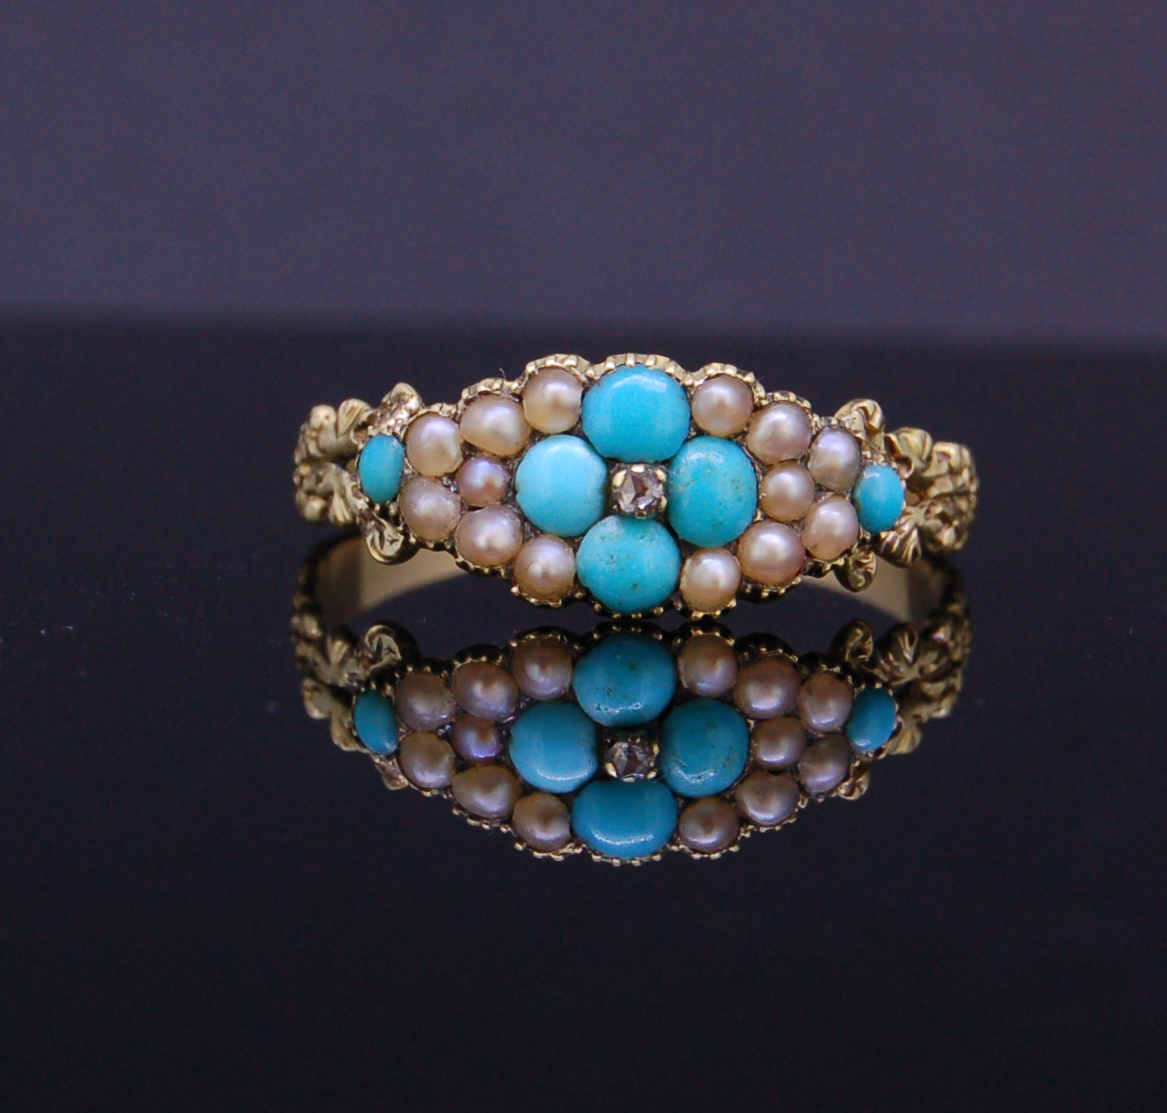 ANTIQUE TURQOISE AND PEARL RING